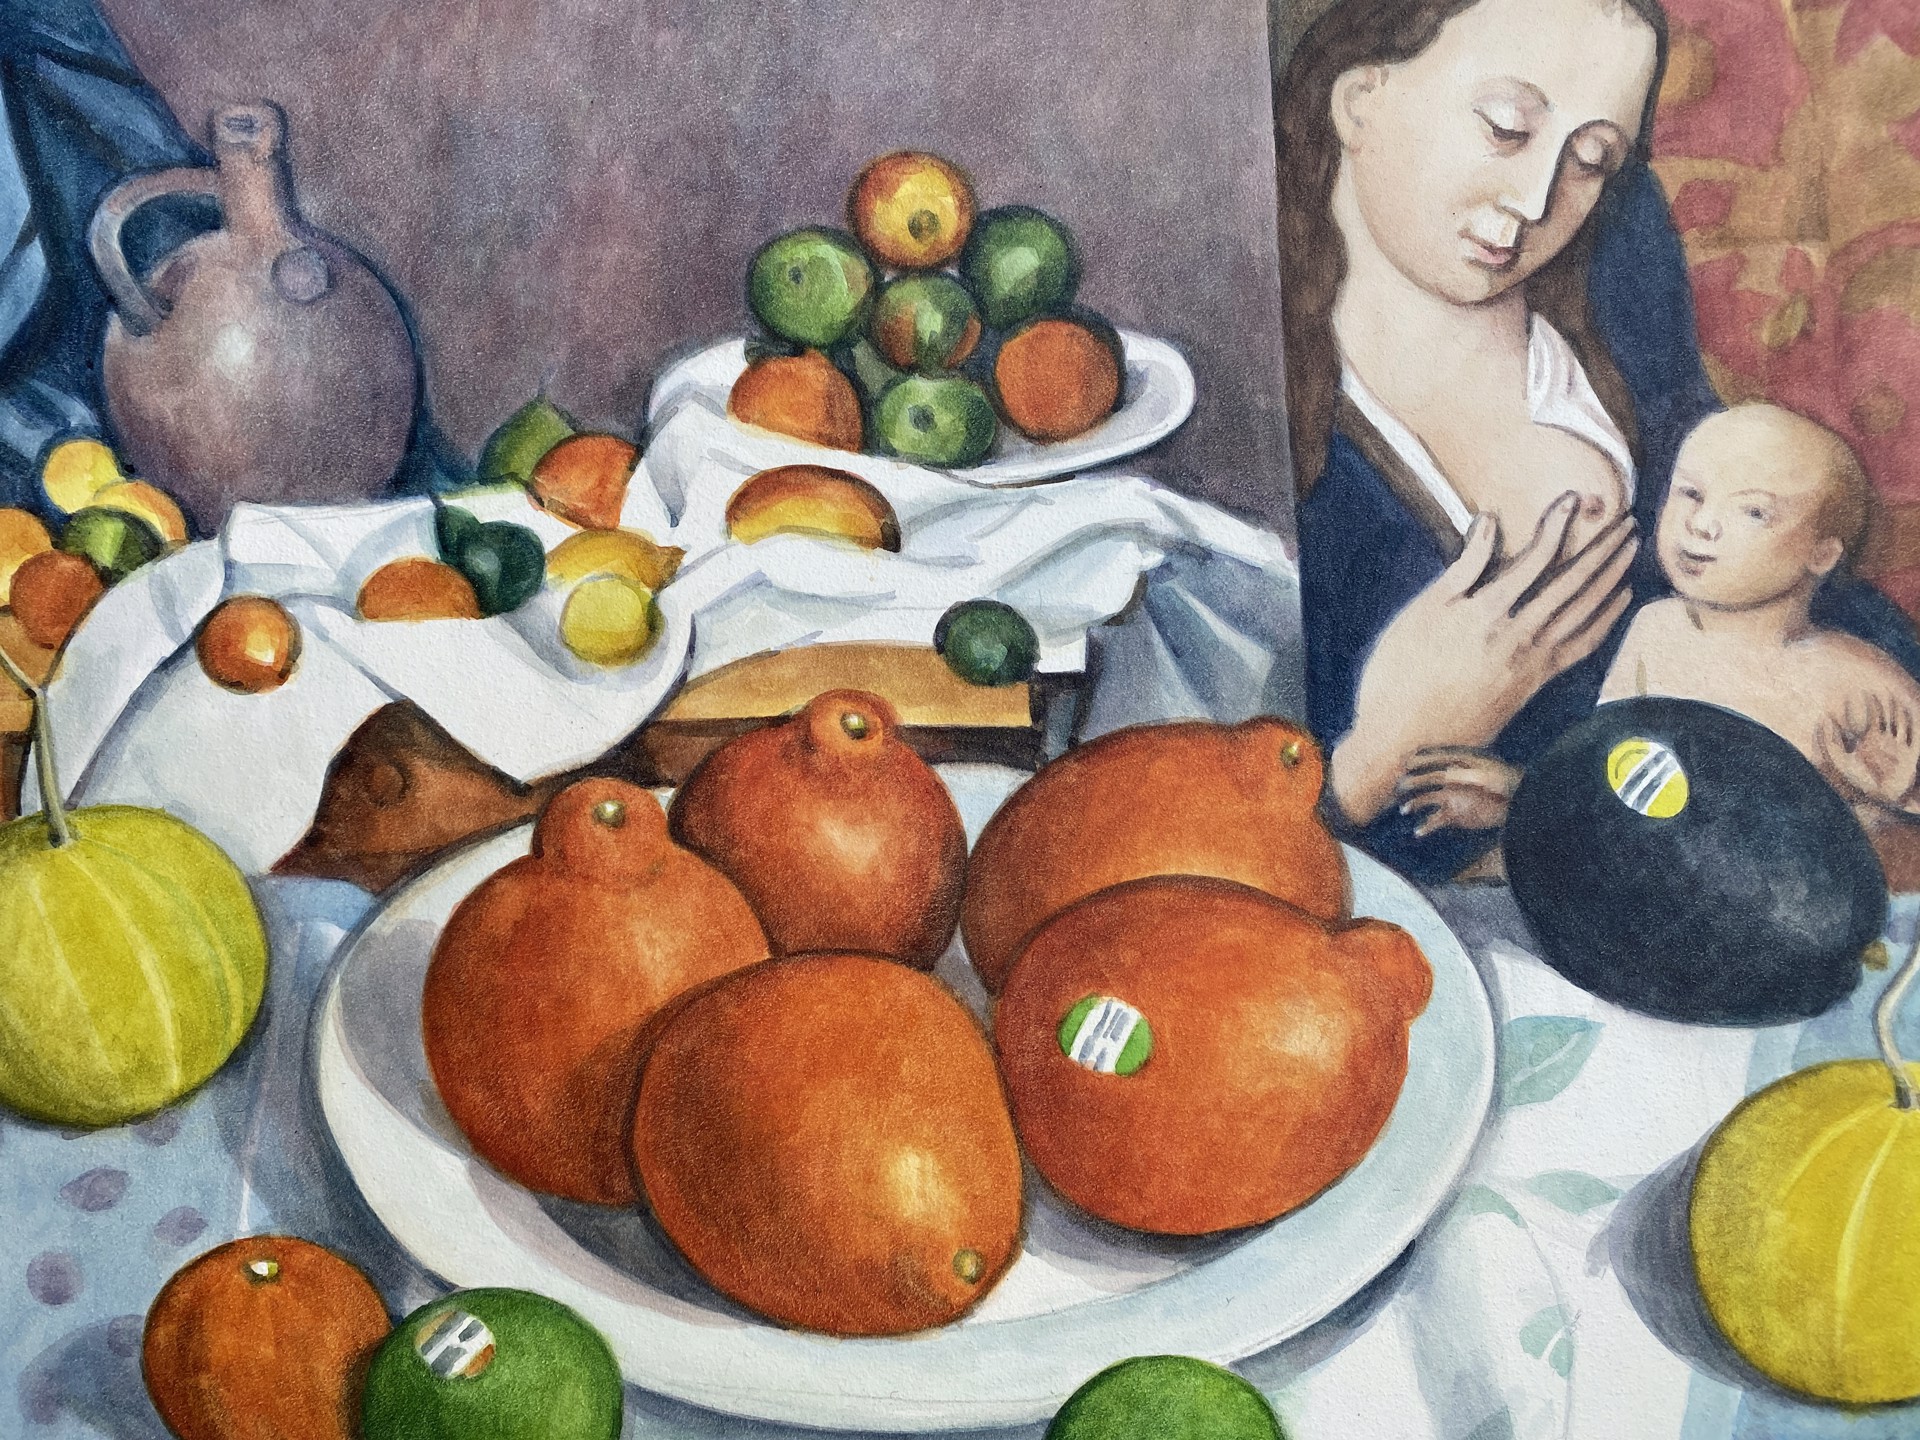 Cezanne, Dieric Bouts and a Plate of Tangelos by Tim Schiffer